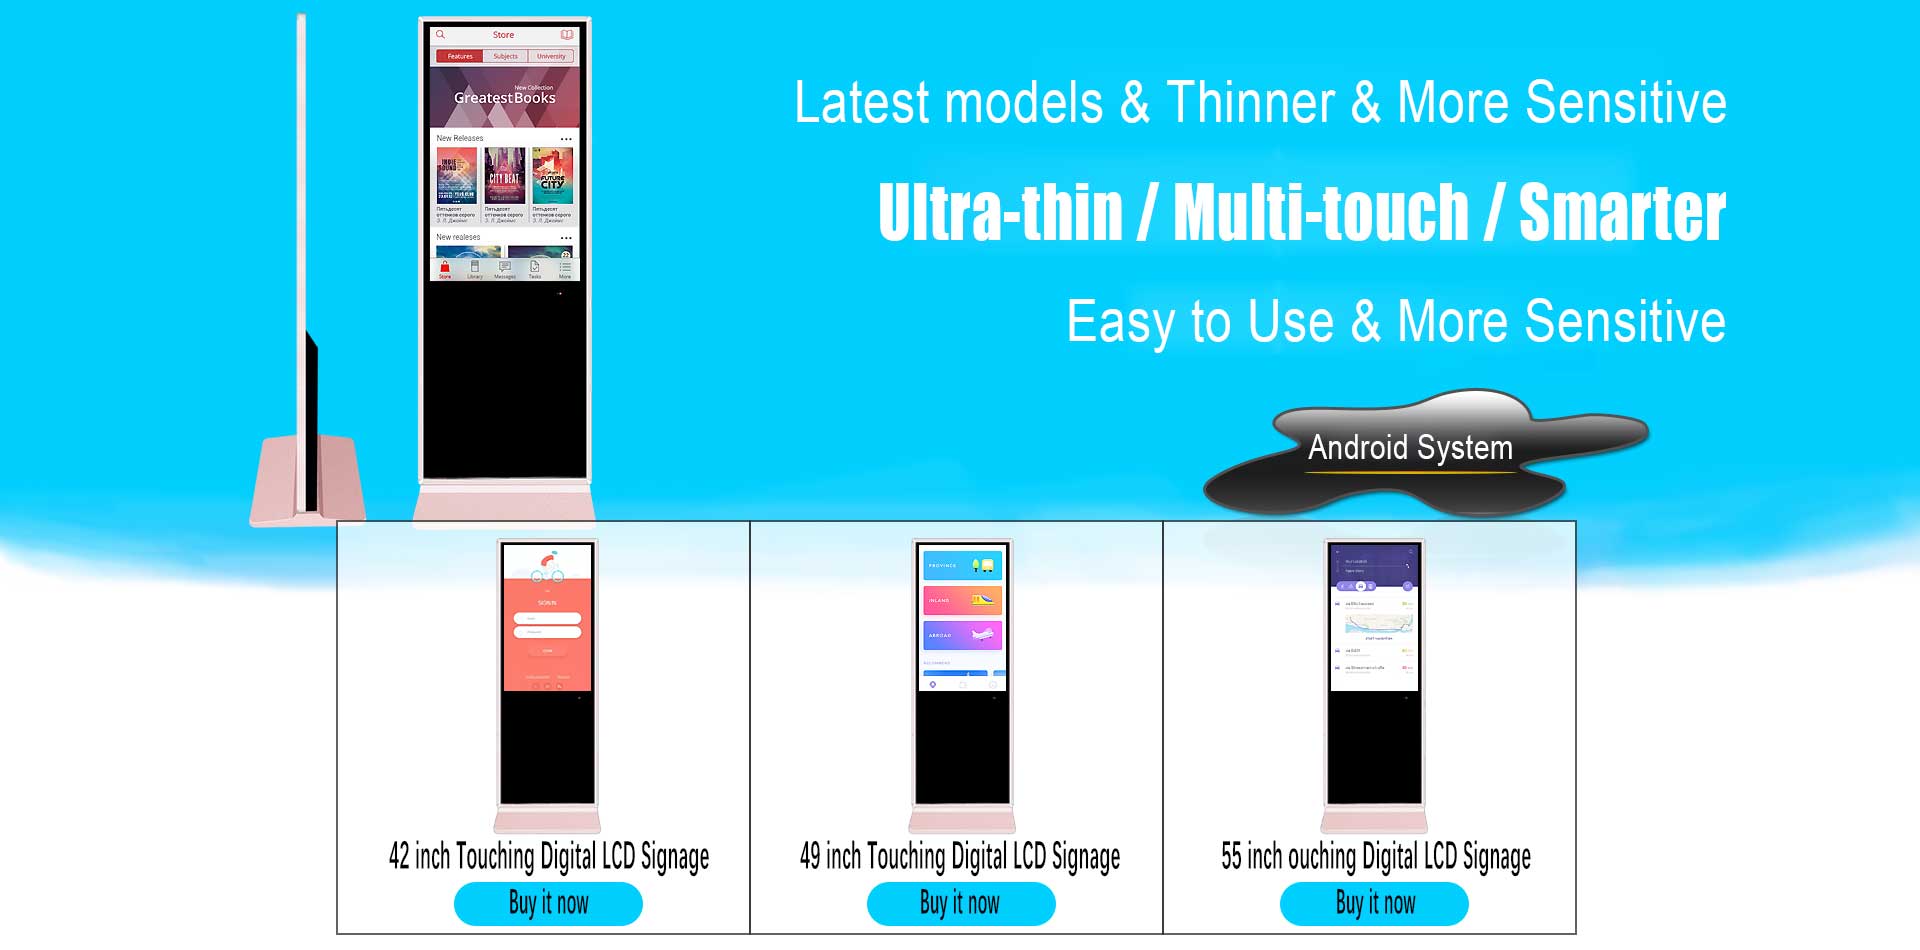 Ultra-sottile-multi-touching-Android-Digital-LCD-Segnage